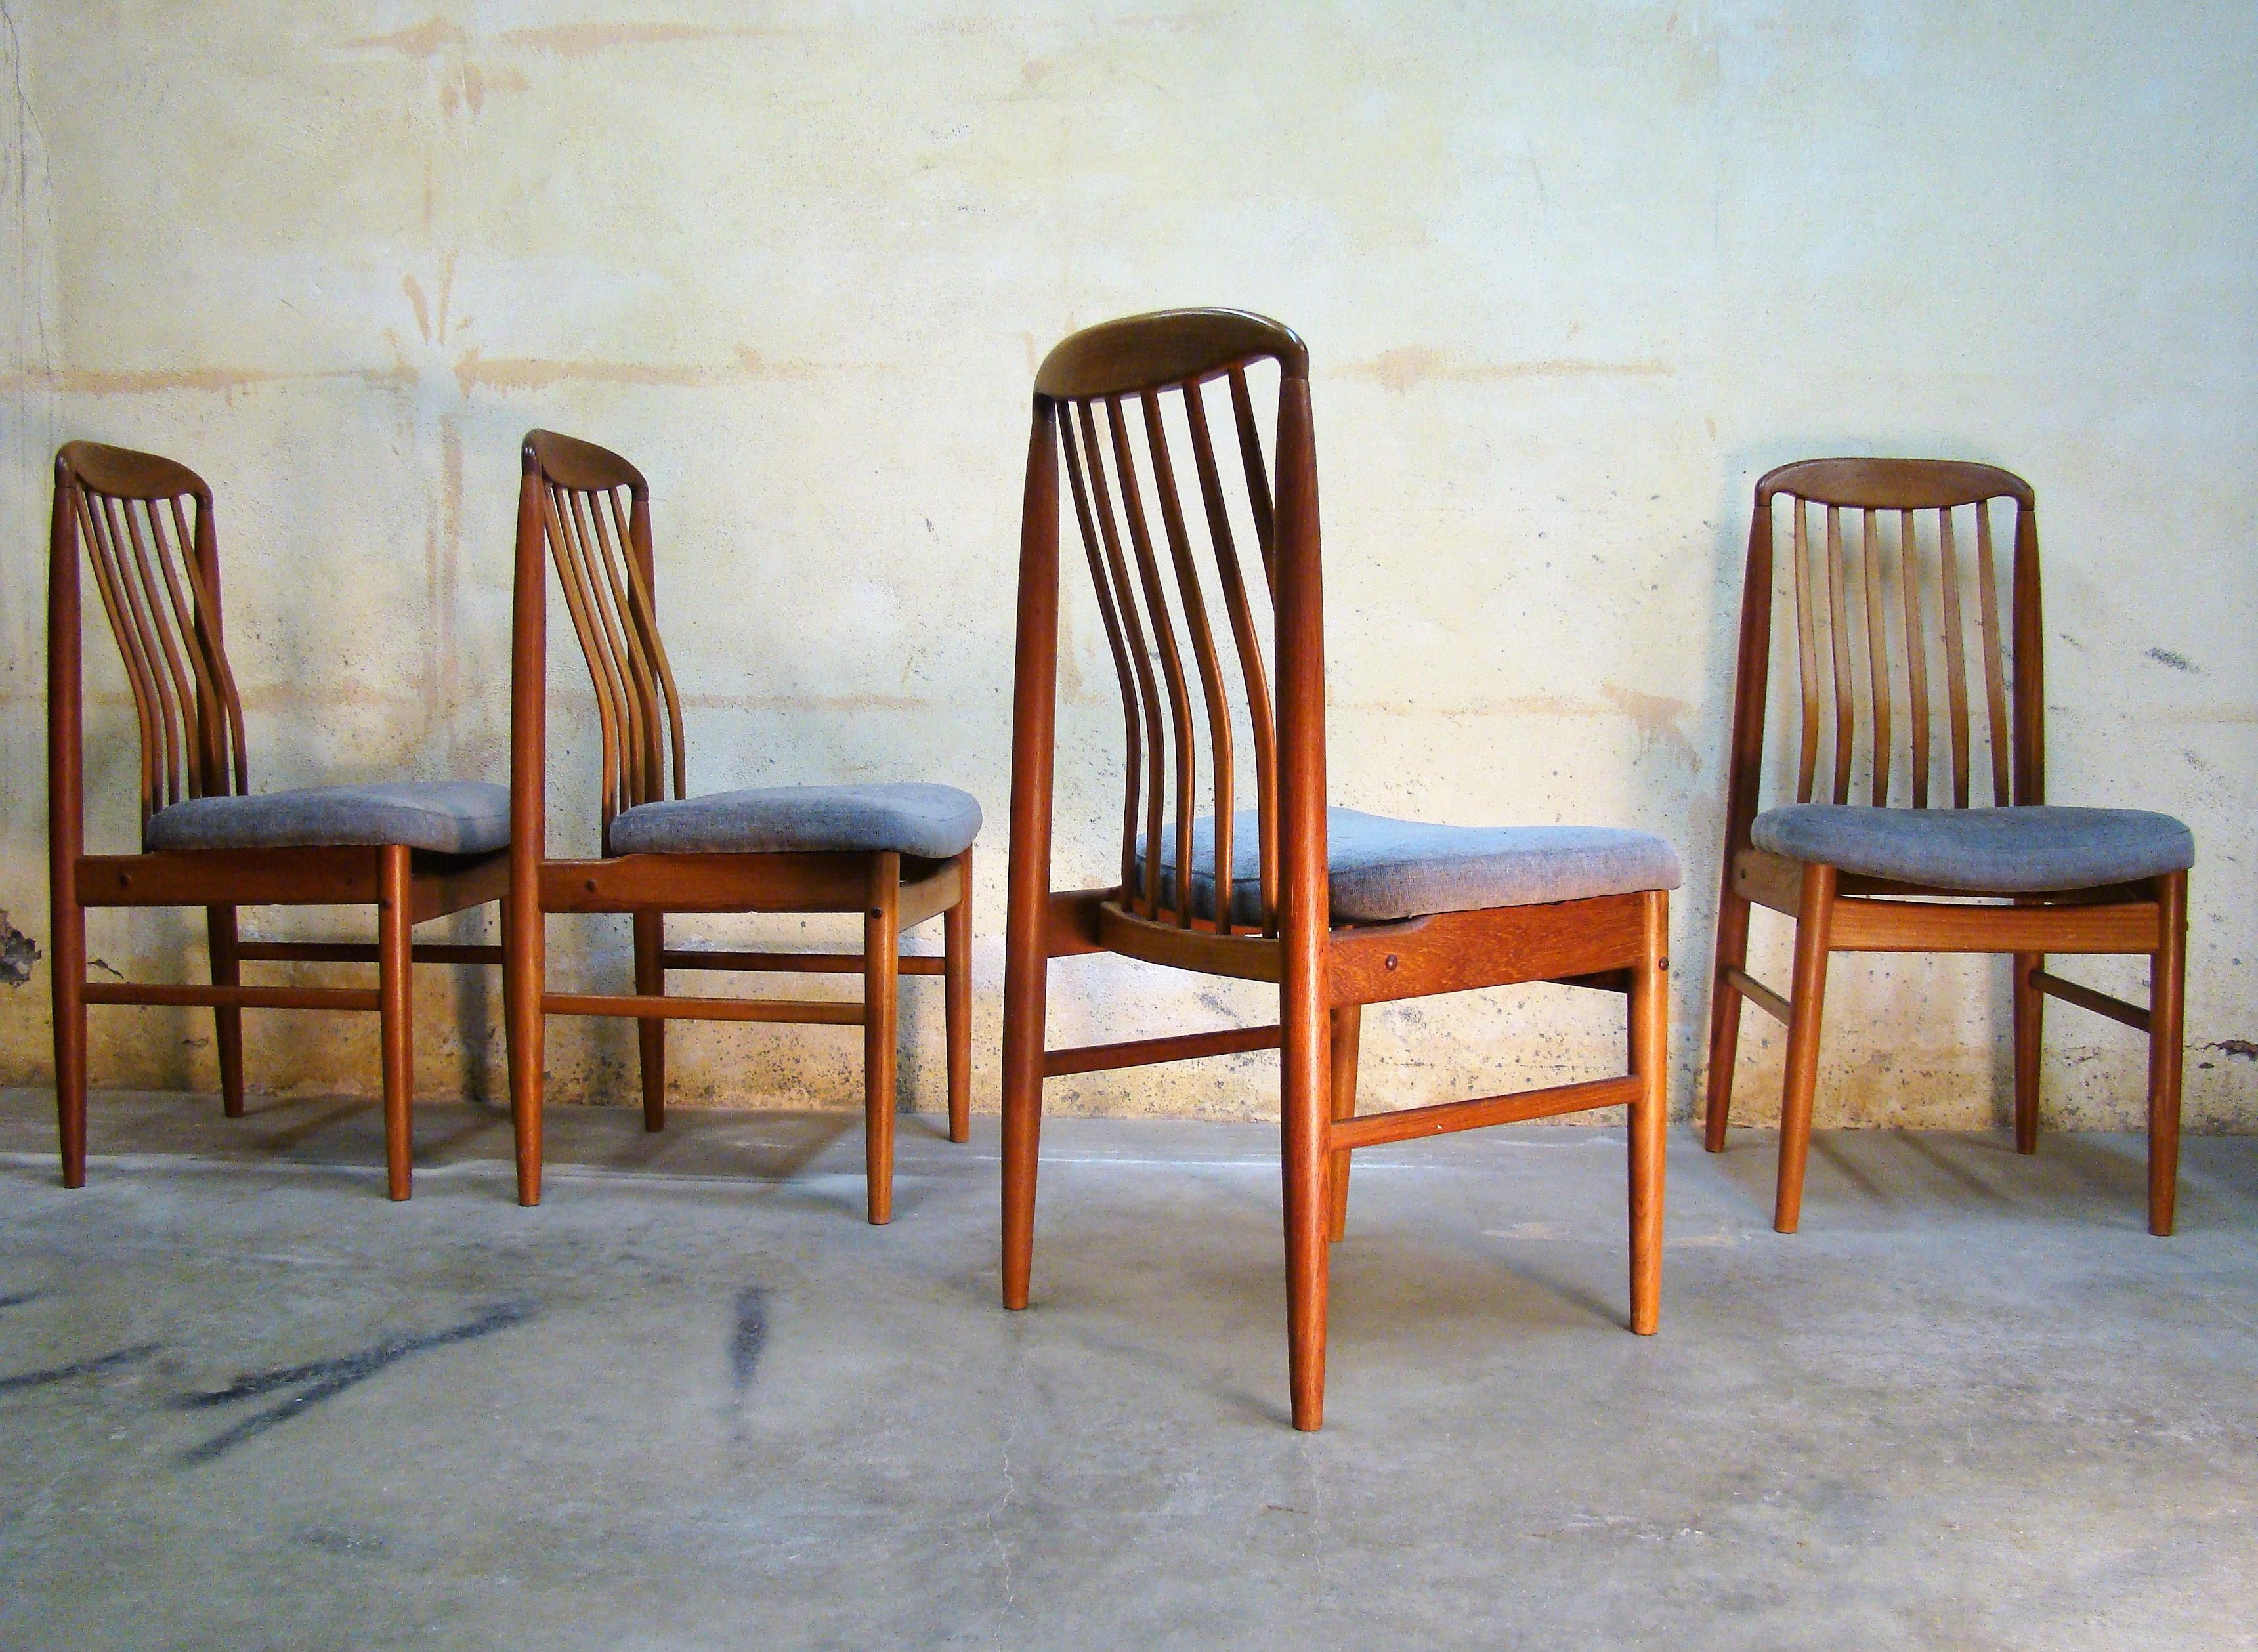 Mid-20th Century Set of Four Teak High-Back Danish Dining Chairs by Benny Linden, 1960s